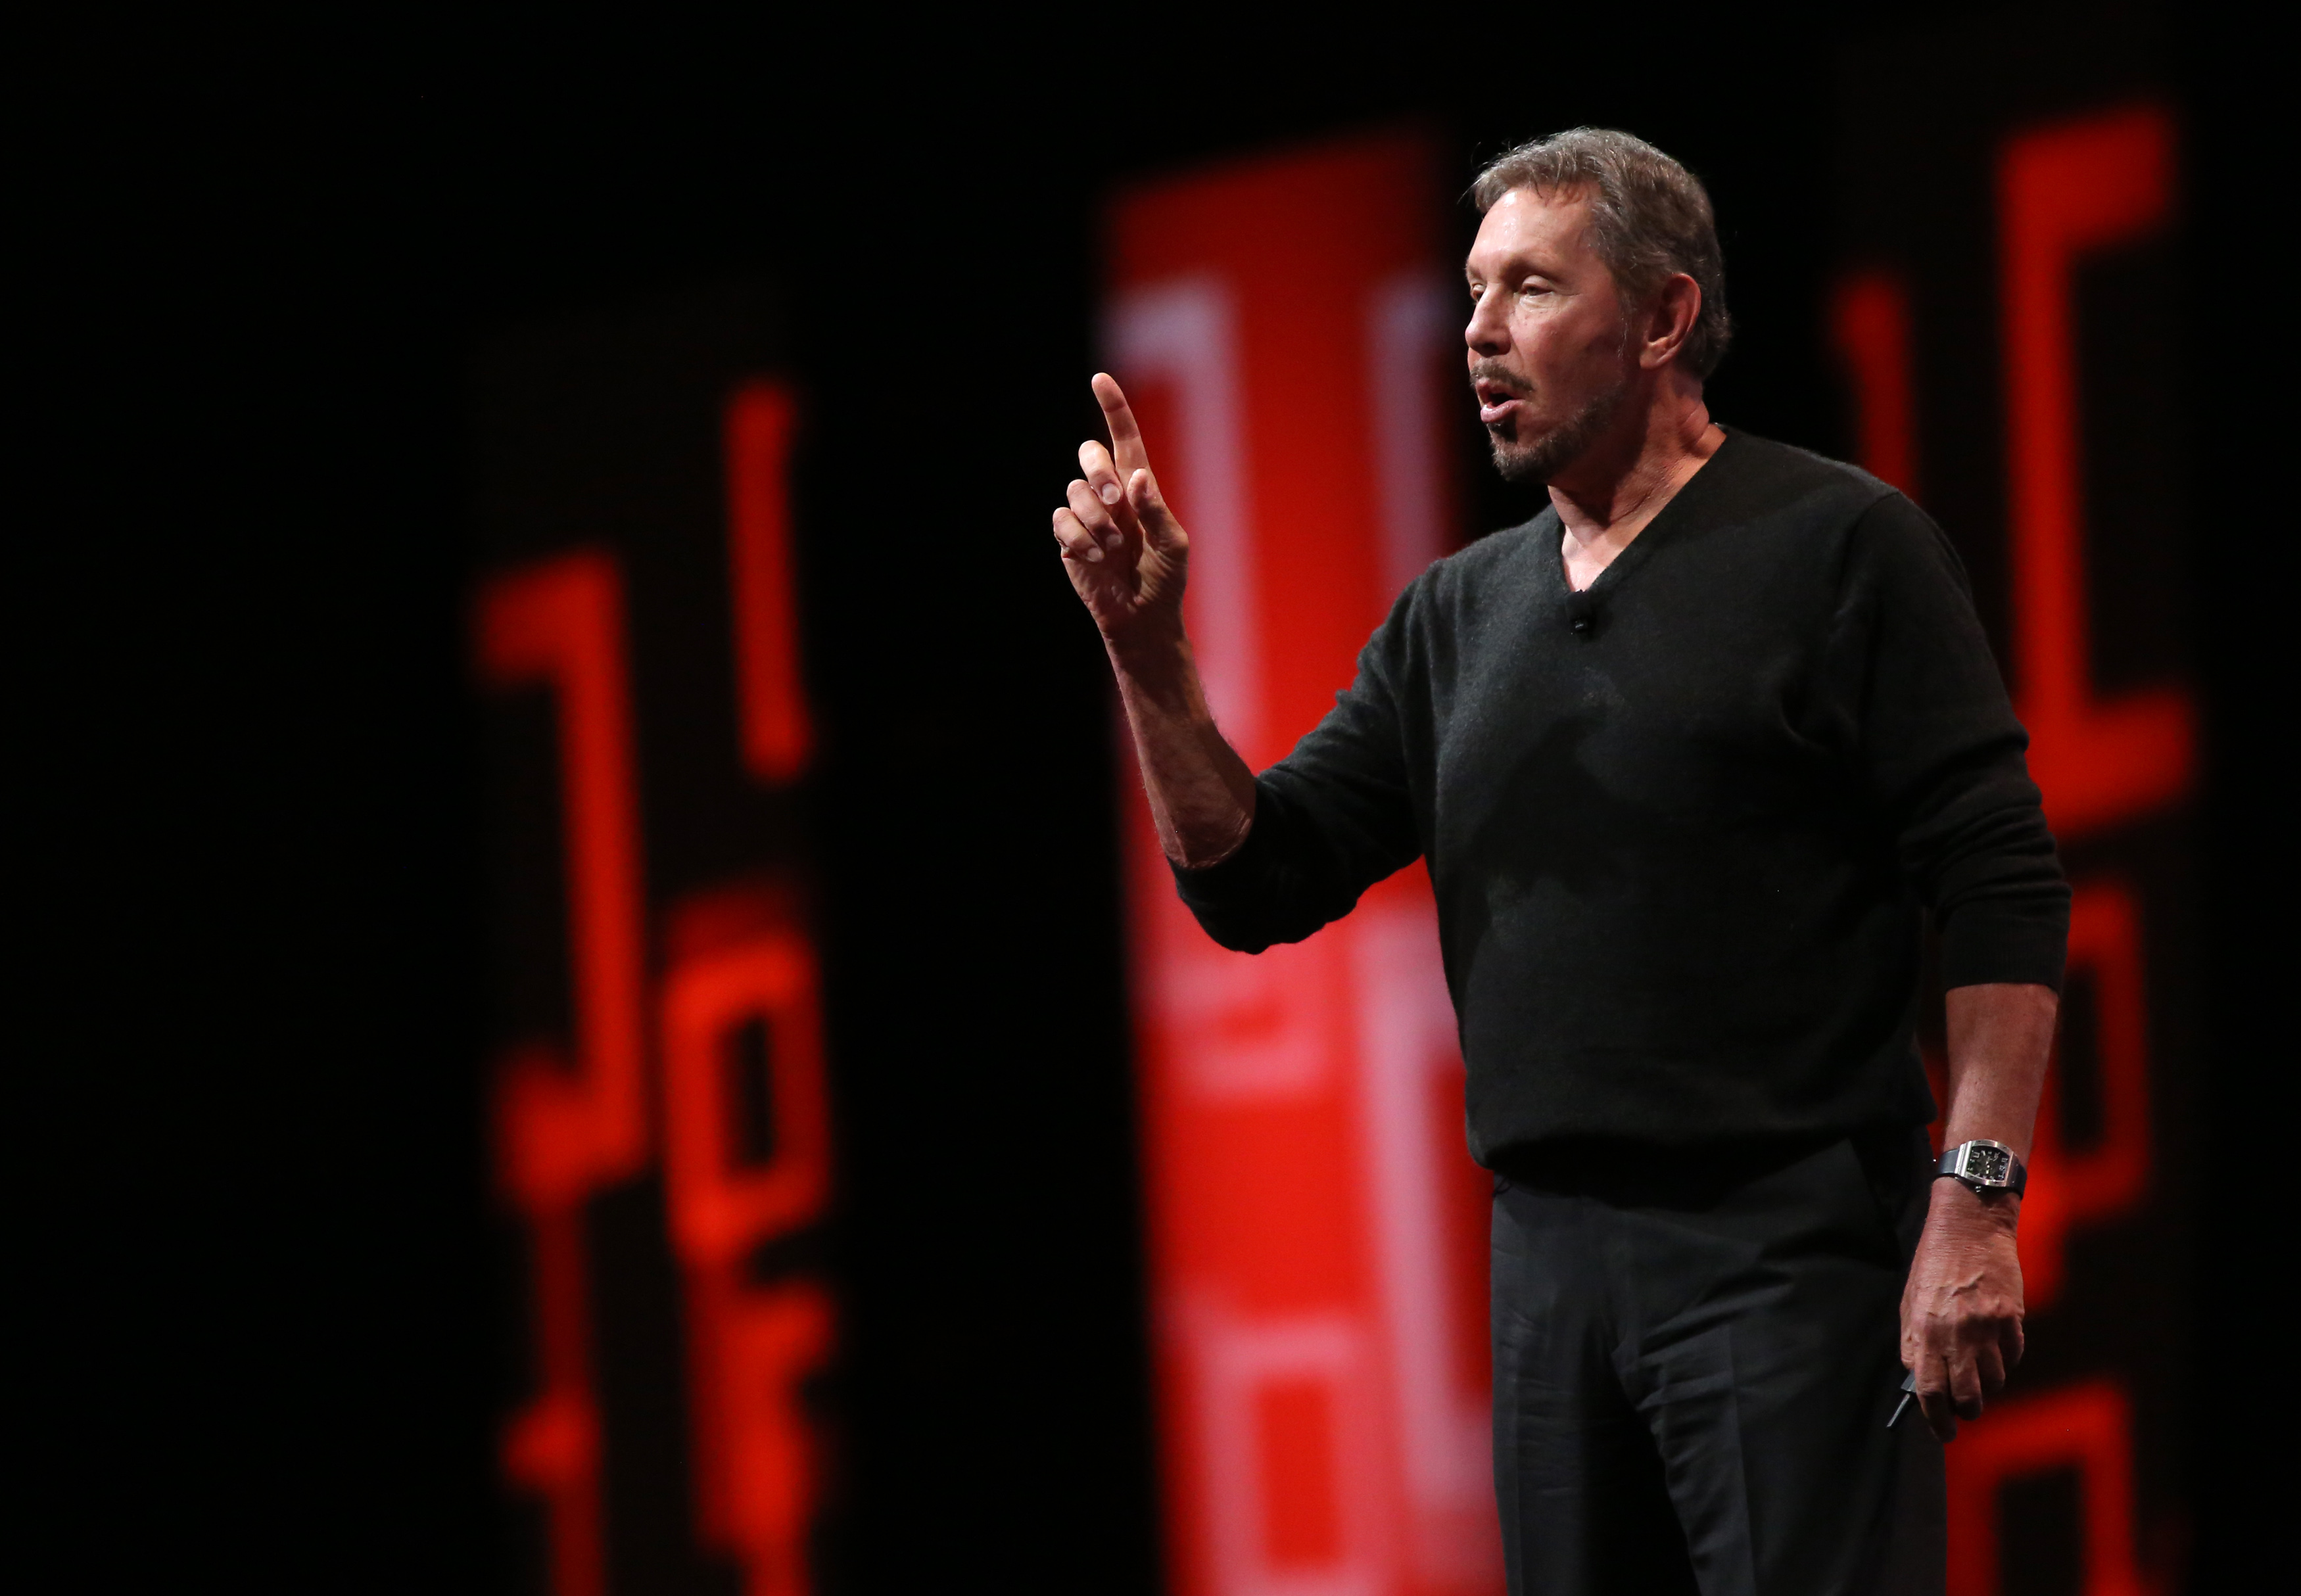 Oracle's Executive Chairman of the Board and Chief Technology Officer Larry Ellison speaks during his keynote address at Oracle OpenWorld in San Francisco